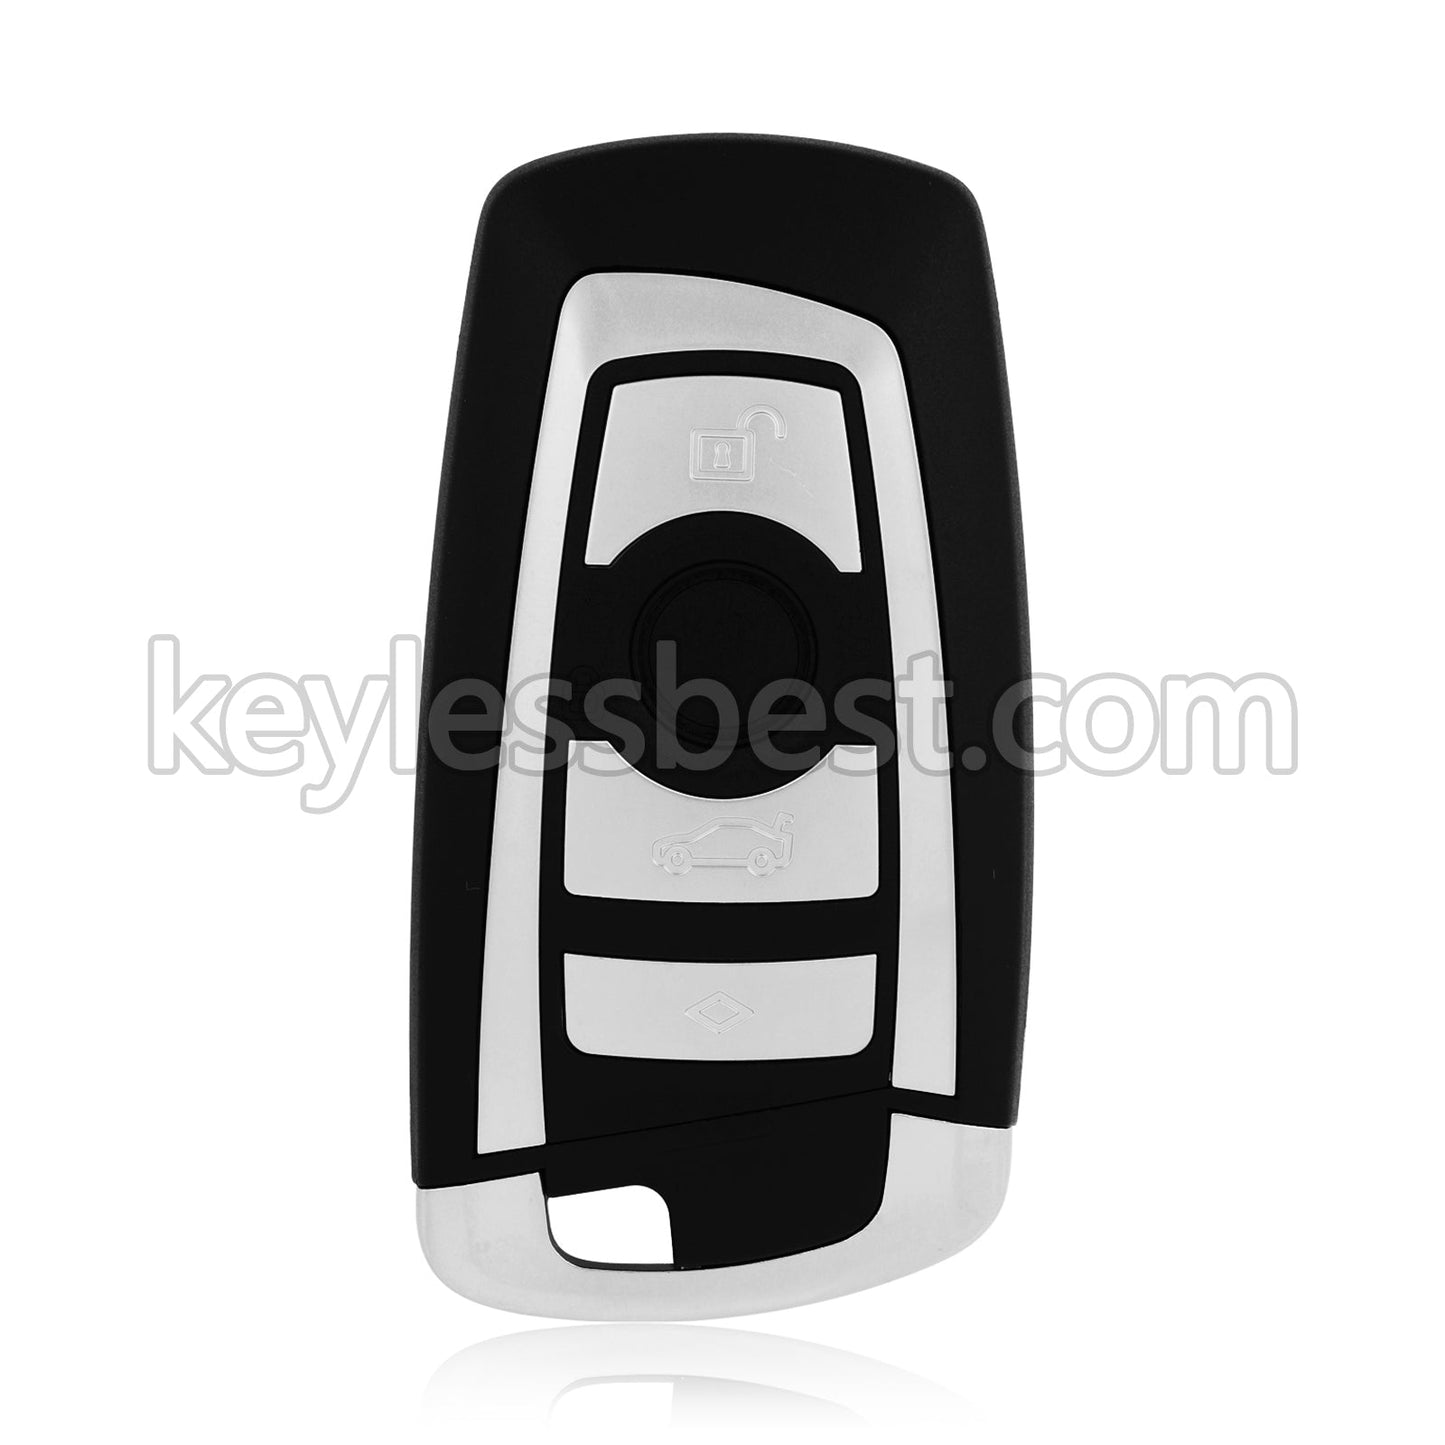 2014 - 2019 BMW X5 6 Series 3 5 / 4 Buttons Remote Key / NBGIDGNG1 / 868MHz